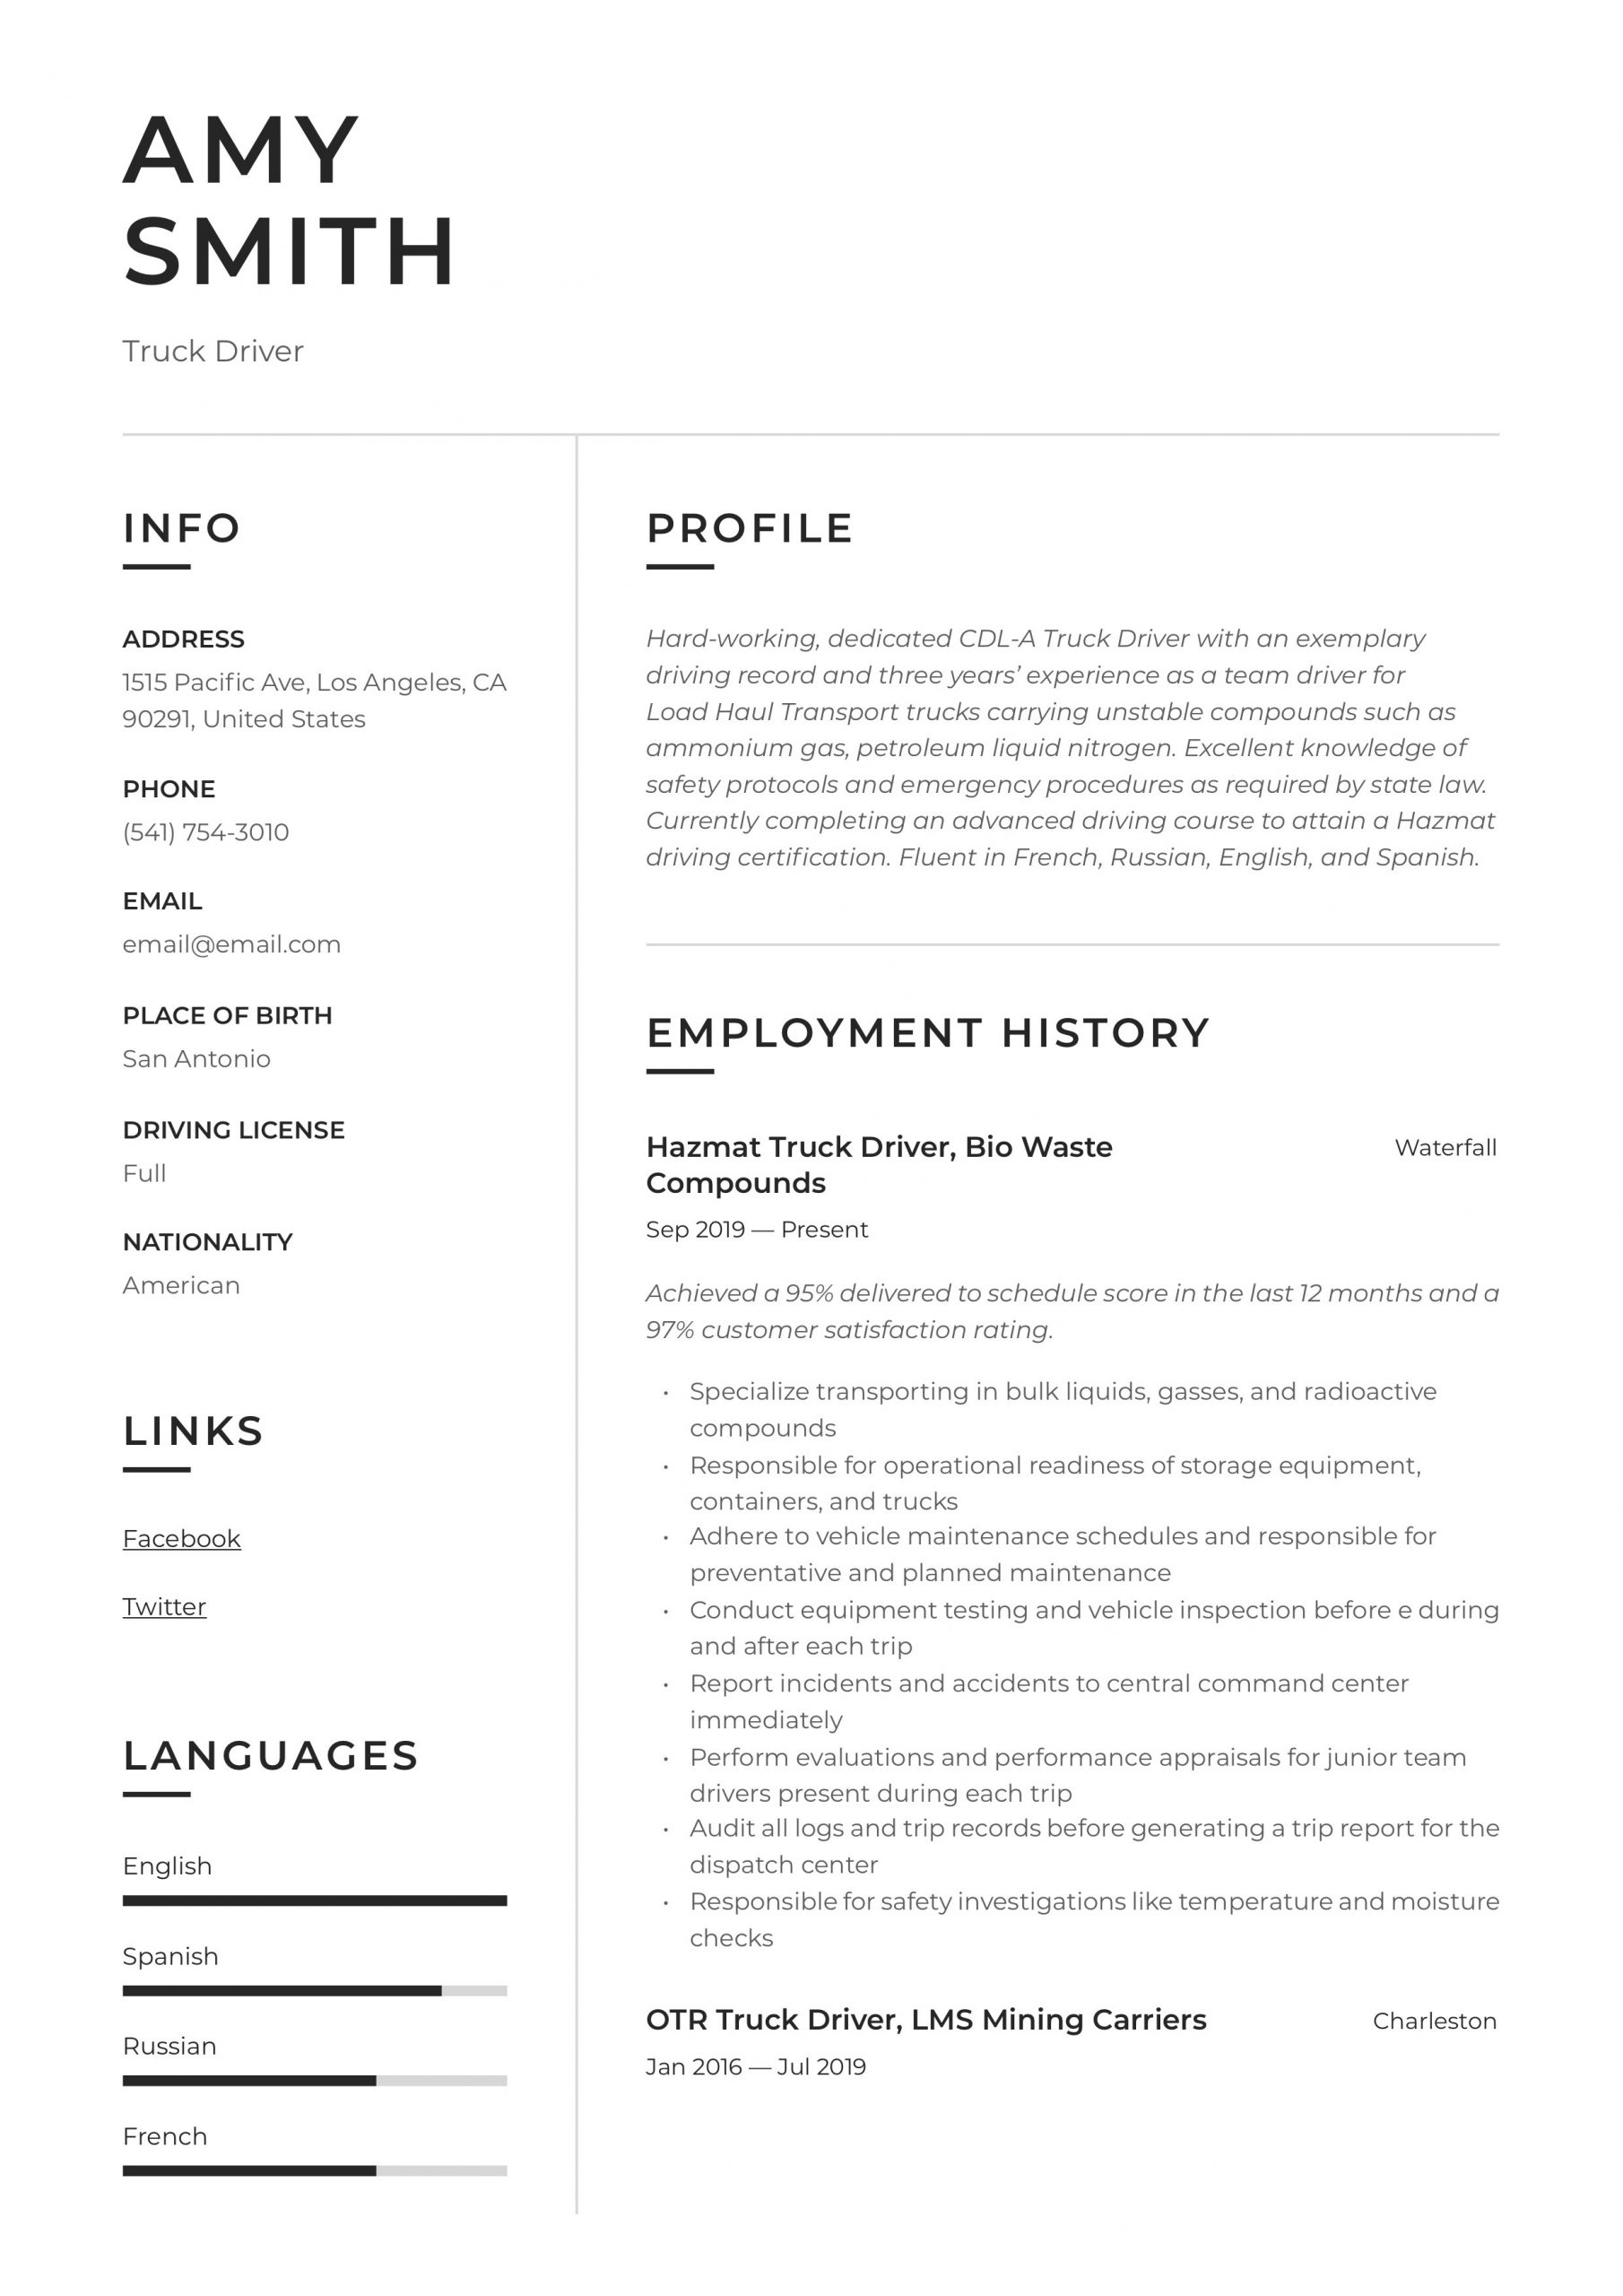 Resume Template for Truck Driving Job Truck Driver Resume & Writing Guide  12 Resume Examples 2019